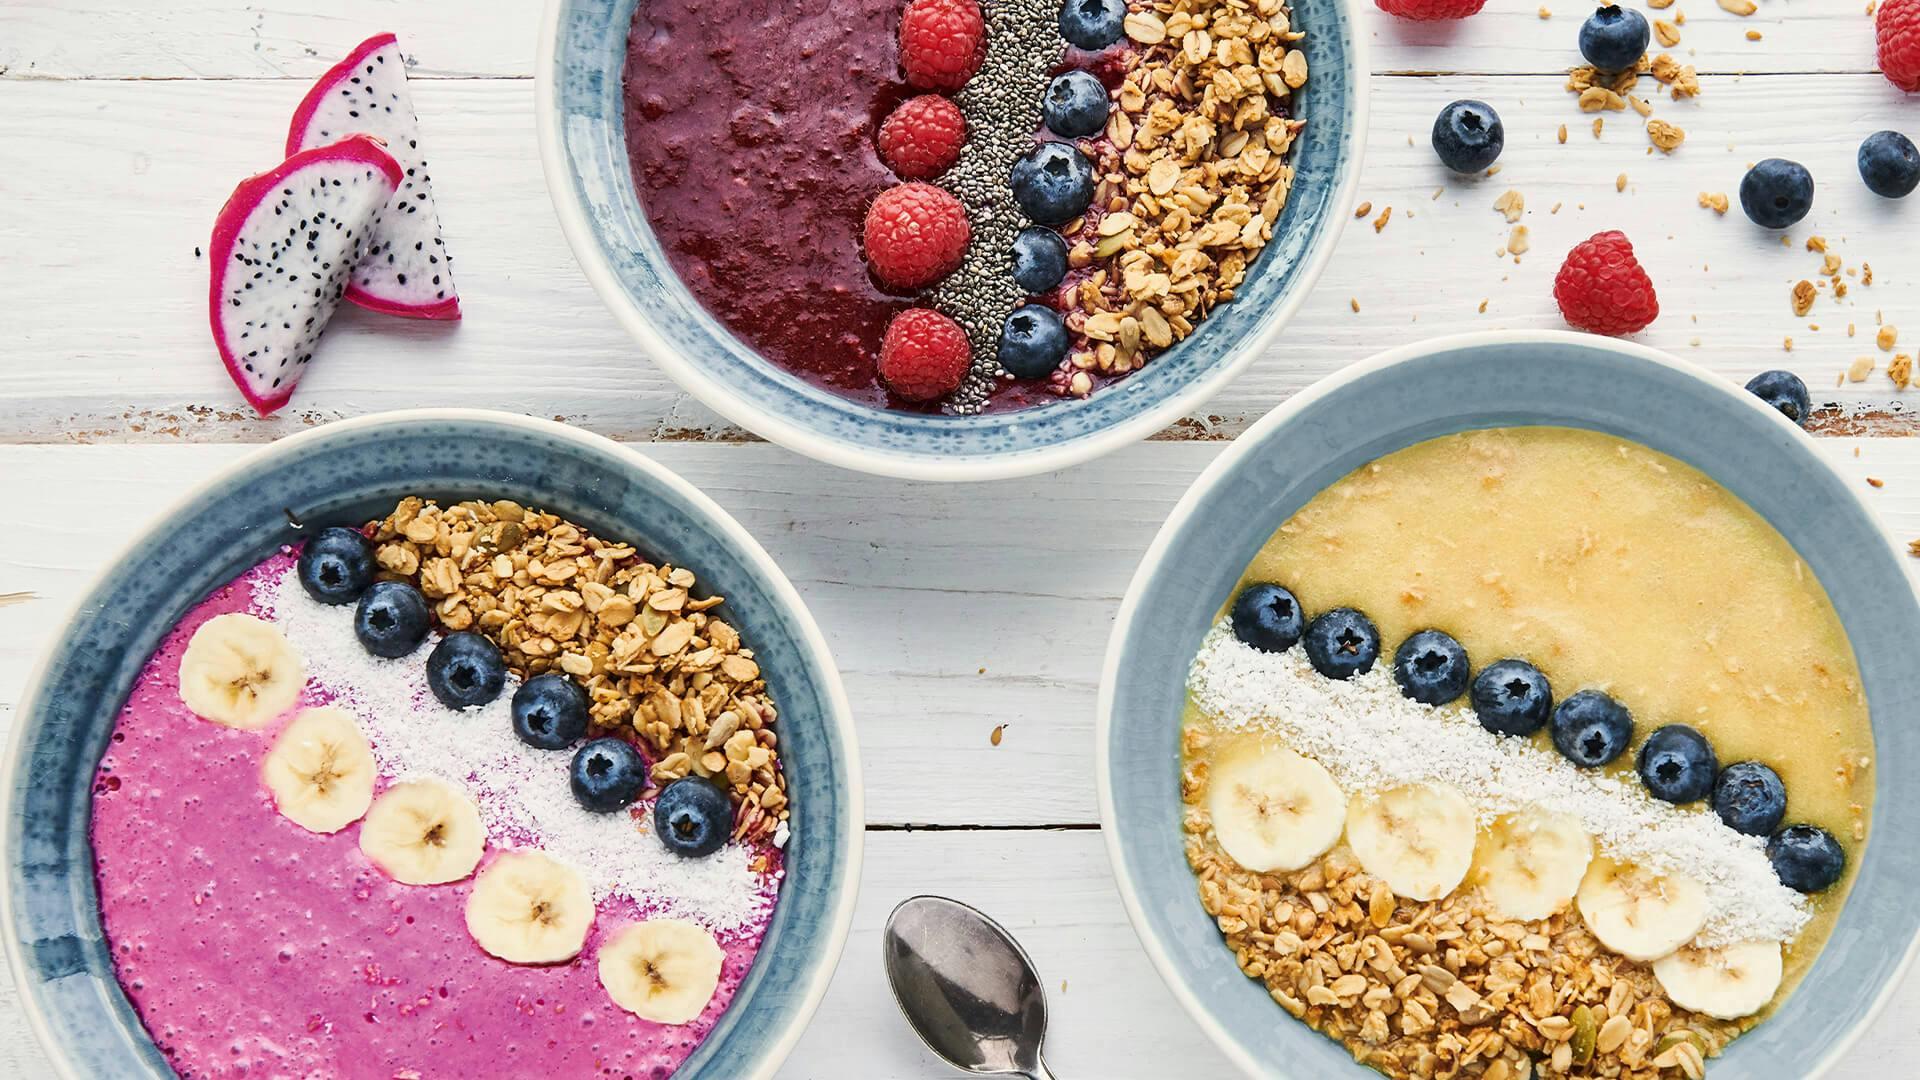 Three different Smoothie Bowls with Toppings